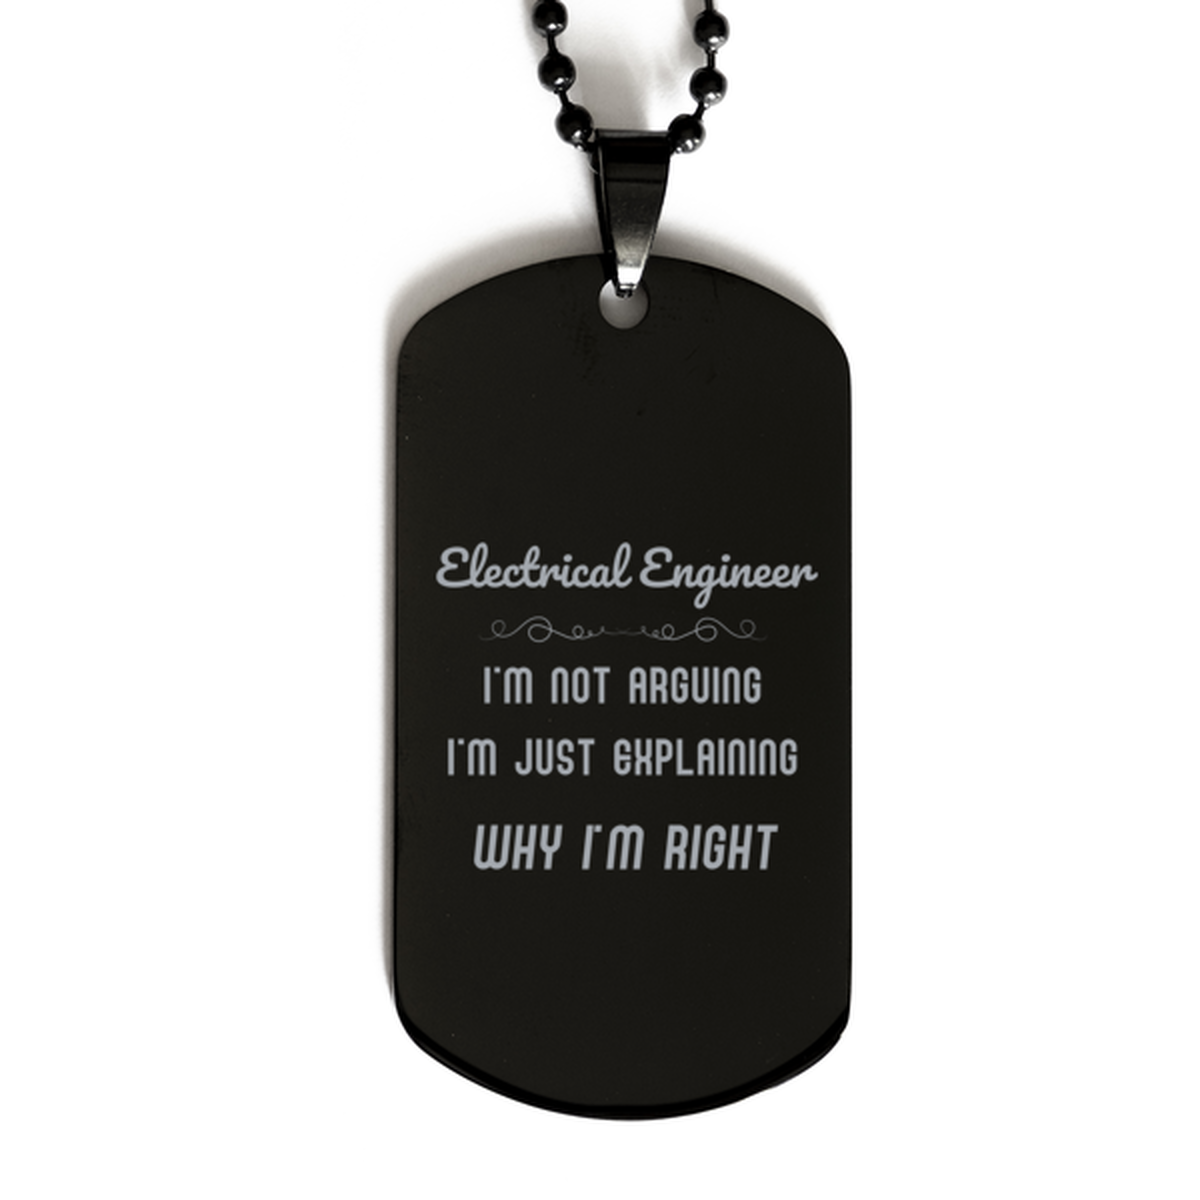 Electrical Engineer I'm not Arguing. I'm Just Explaining Why I'm RIGHT Black Dog Tag, Funny Saying Quote Electrical Engineer Gifts For Electrical Engineer Graduation Birthday Christmas Gifts for Men Women Coworker